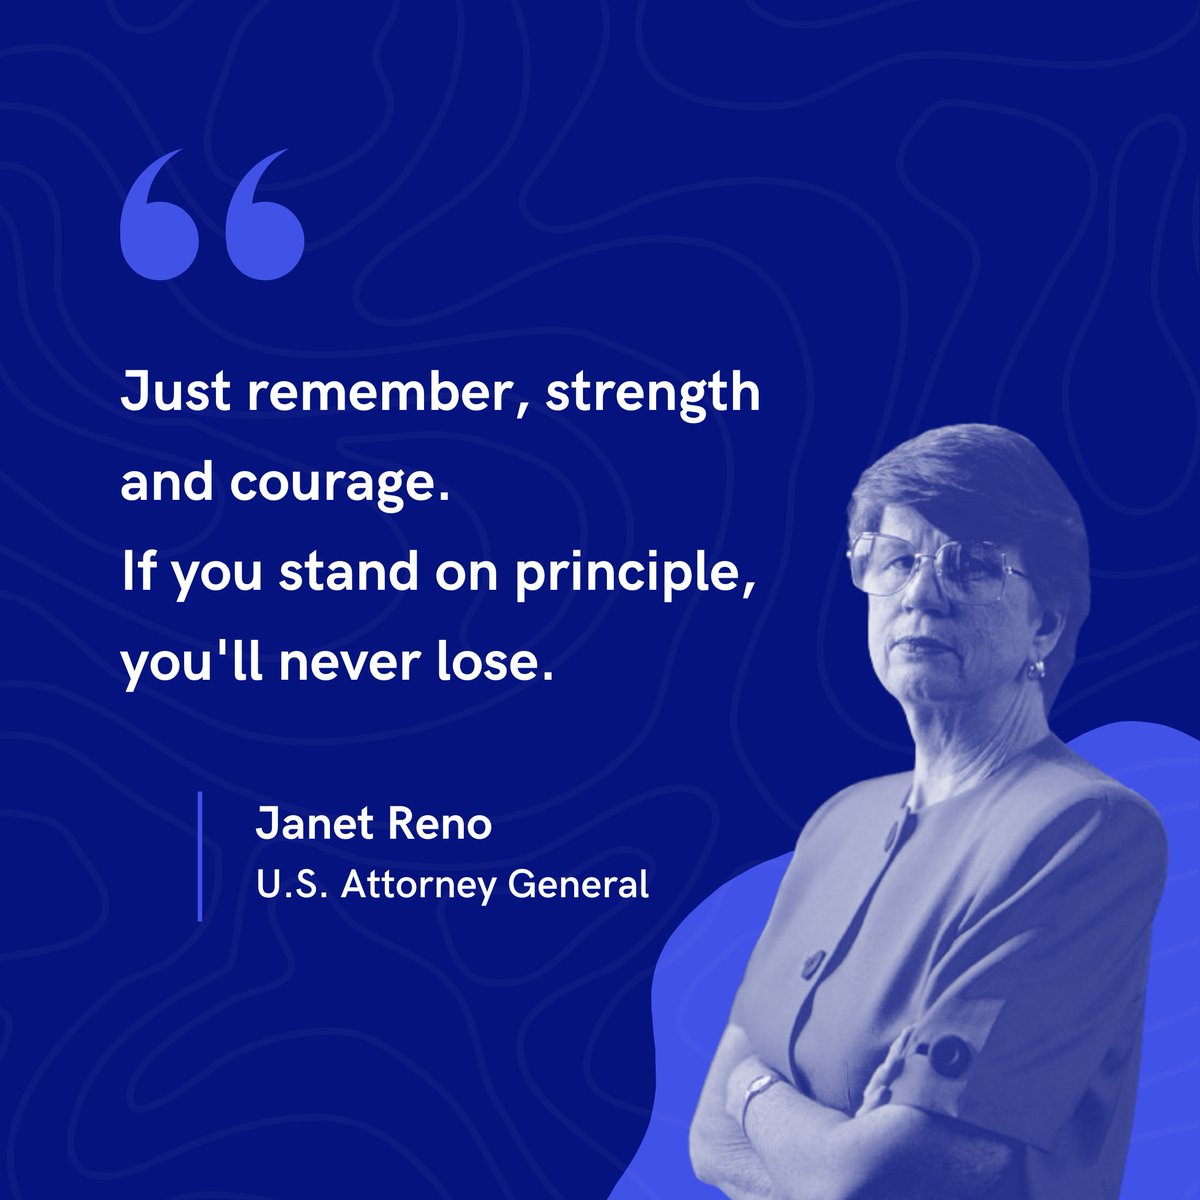 Remembering the trailblazing Janet Reno, the first woman to serve as U.S. Attorney General. Her legacy is one of strength, resilience, and dedication to justice. A true inspiration for breaking barriers! #JanetReno #Trailblazer #JusticeForAll